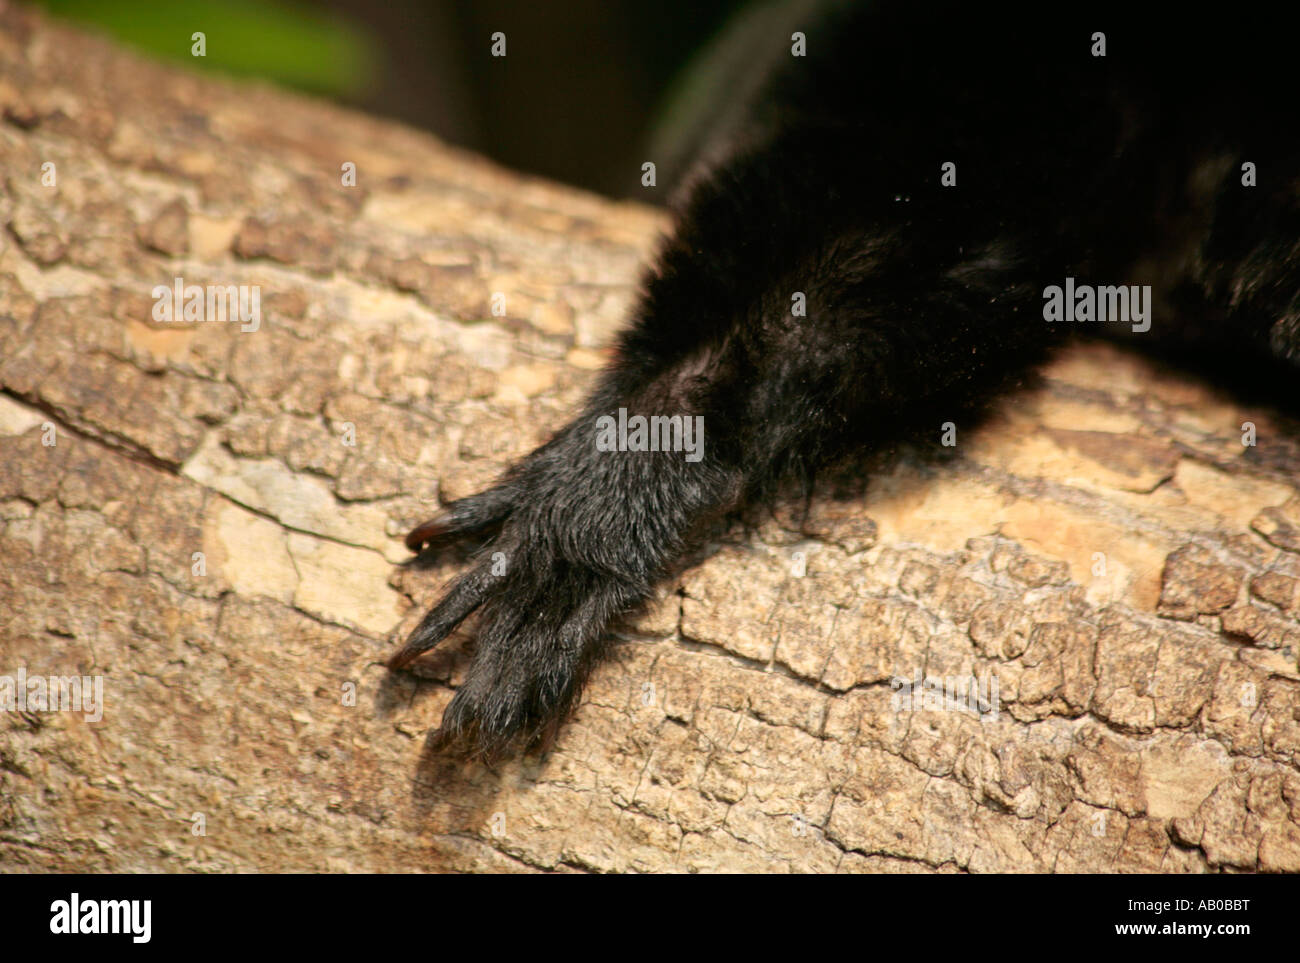 Tiny Goeldis Monkey Paw resting on tree branch and showing its claws Stock Photo